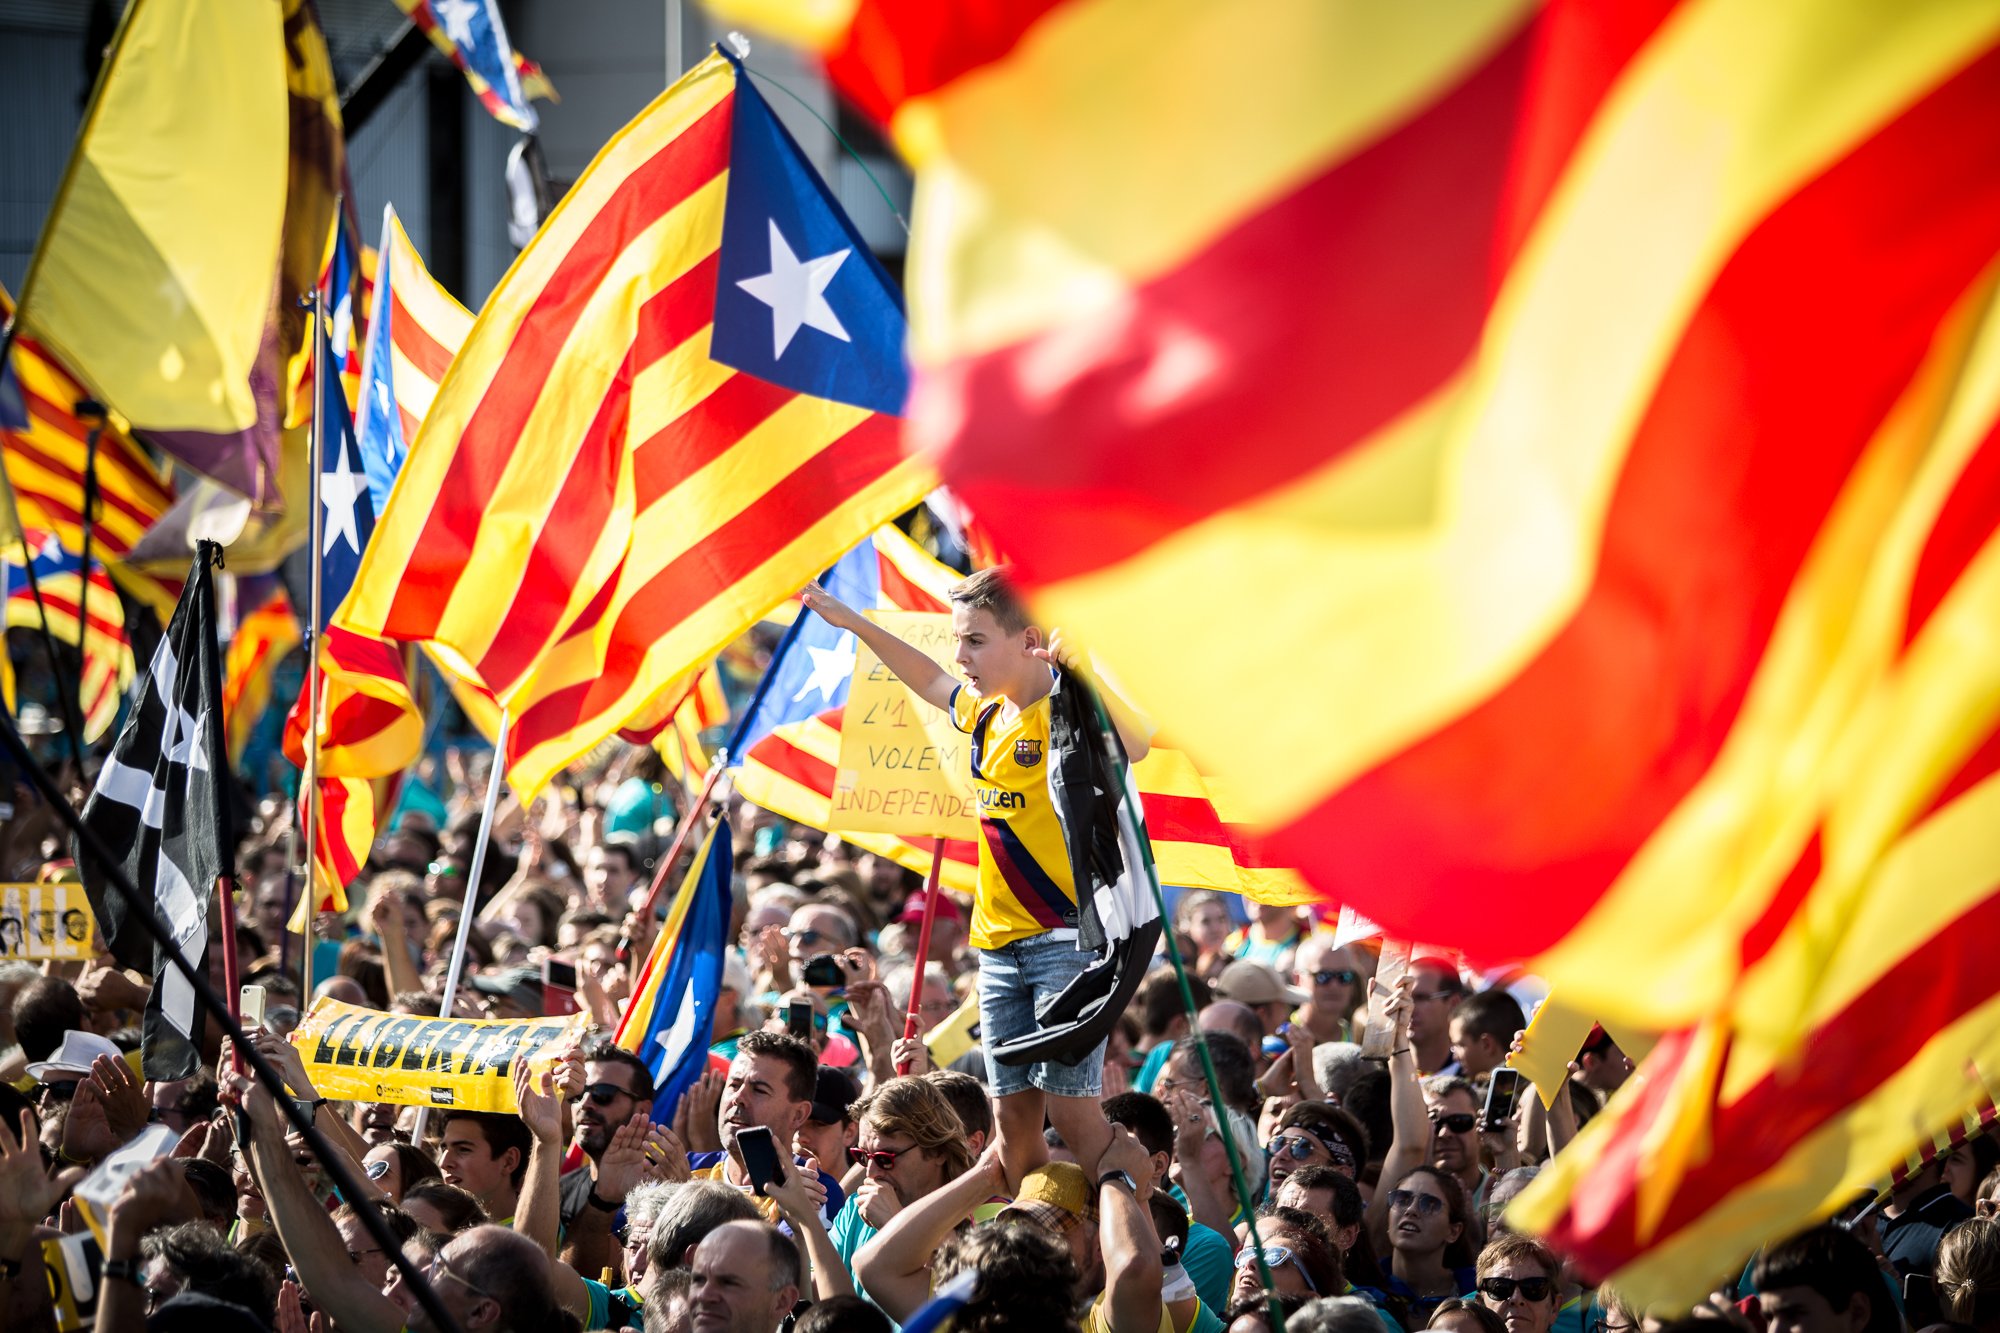 German TV warns situation "could change again suddenly" in Catalonia